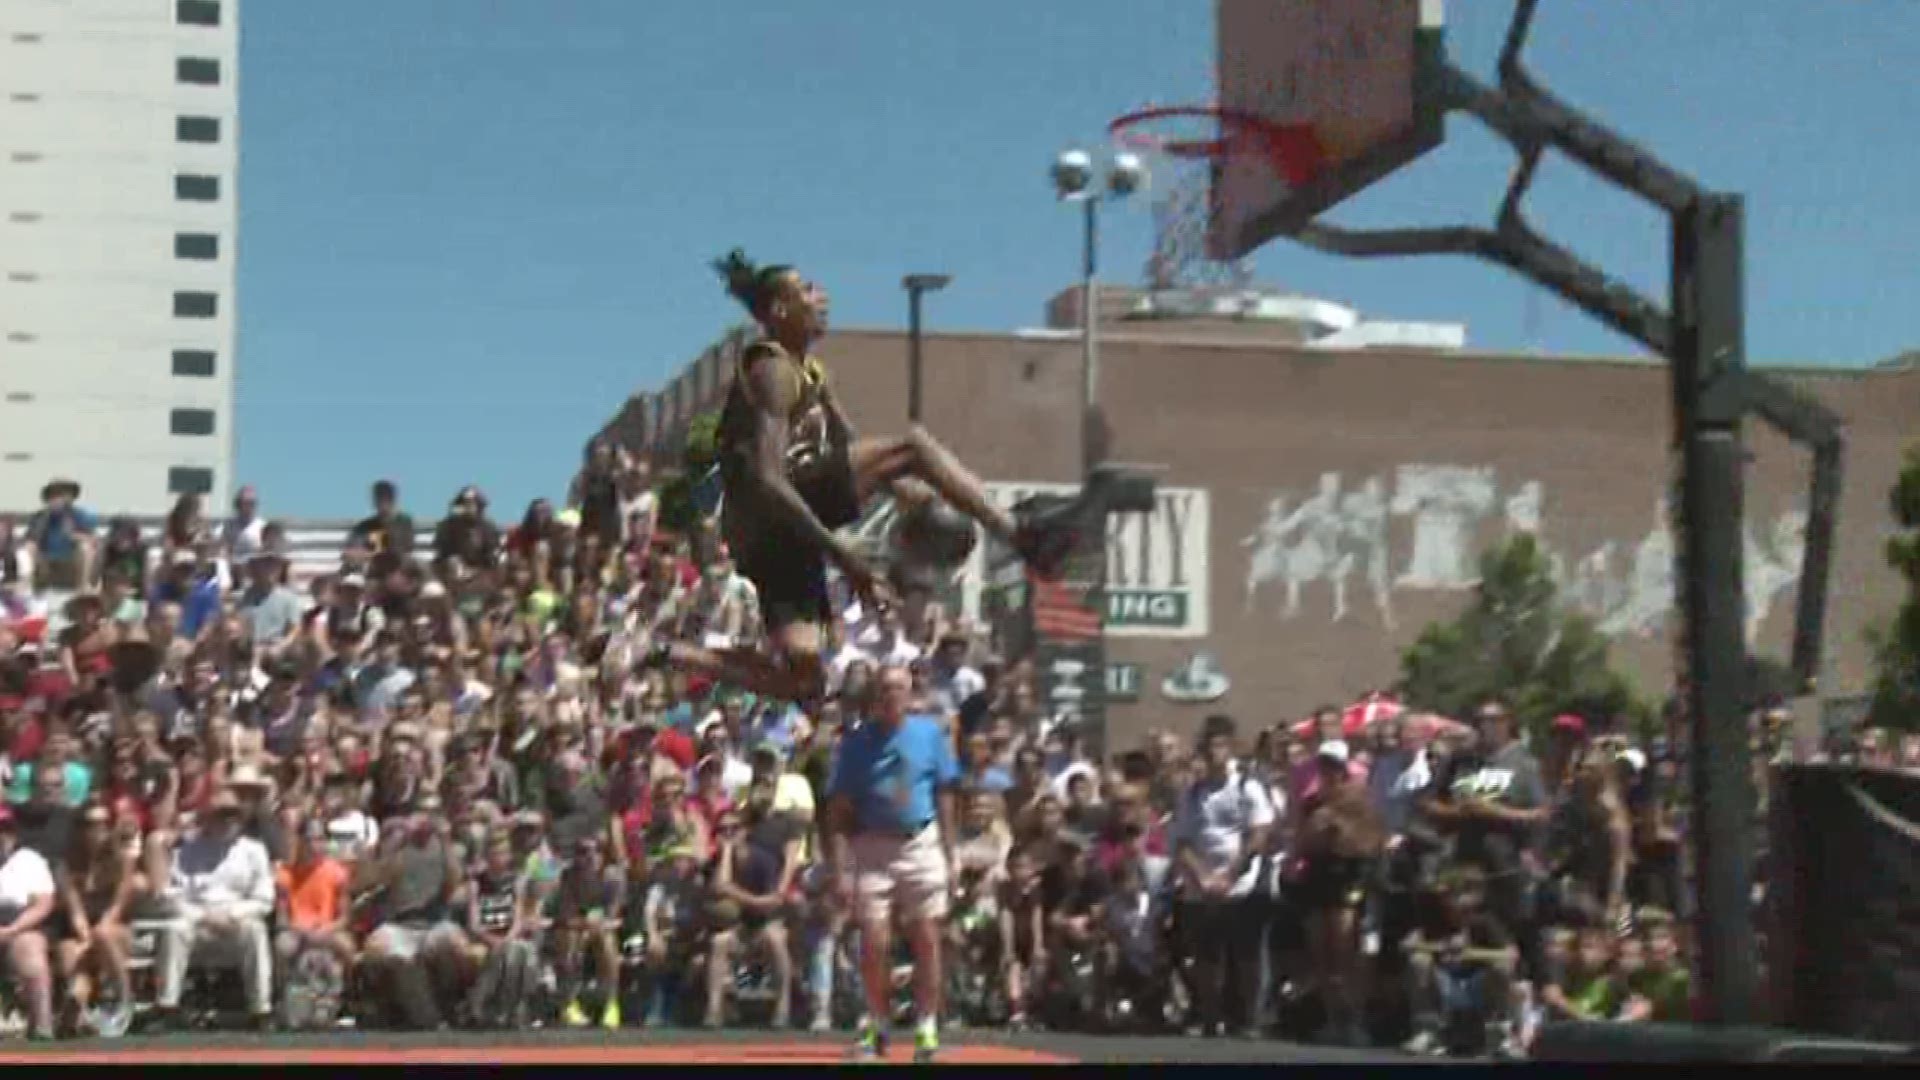 Plenty of dunkers came out to Hoopfest to show what they can do. We take a look at the qualifying round, as well as the Toyota Shootout.